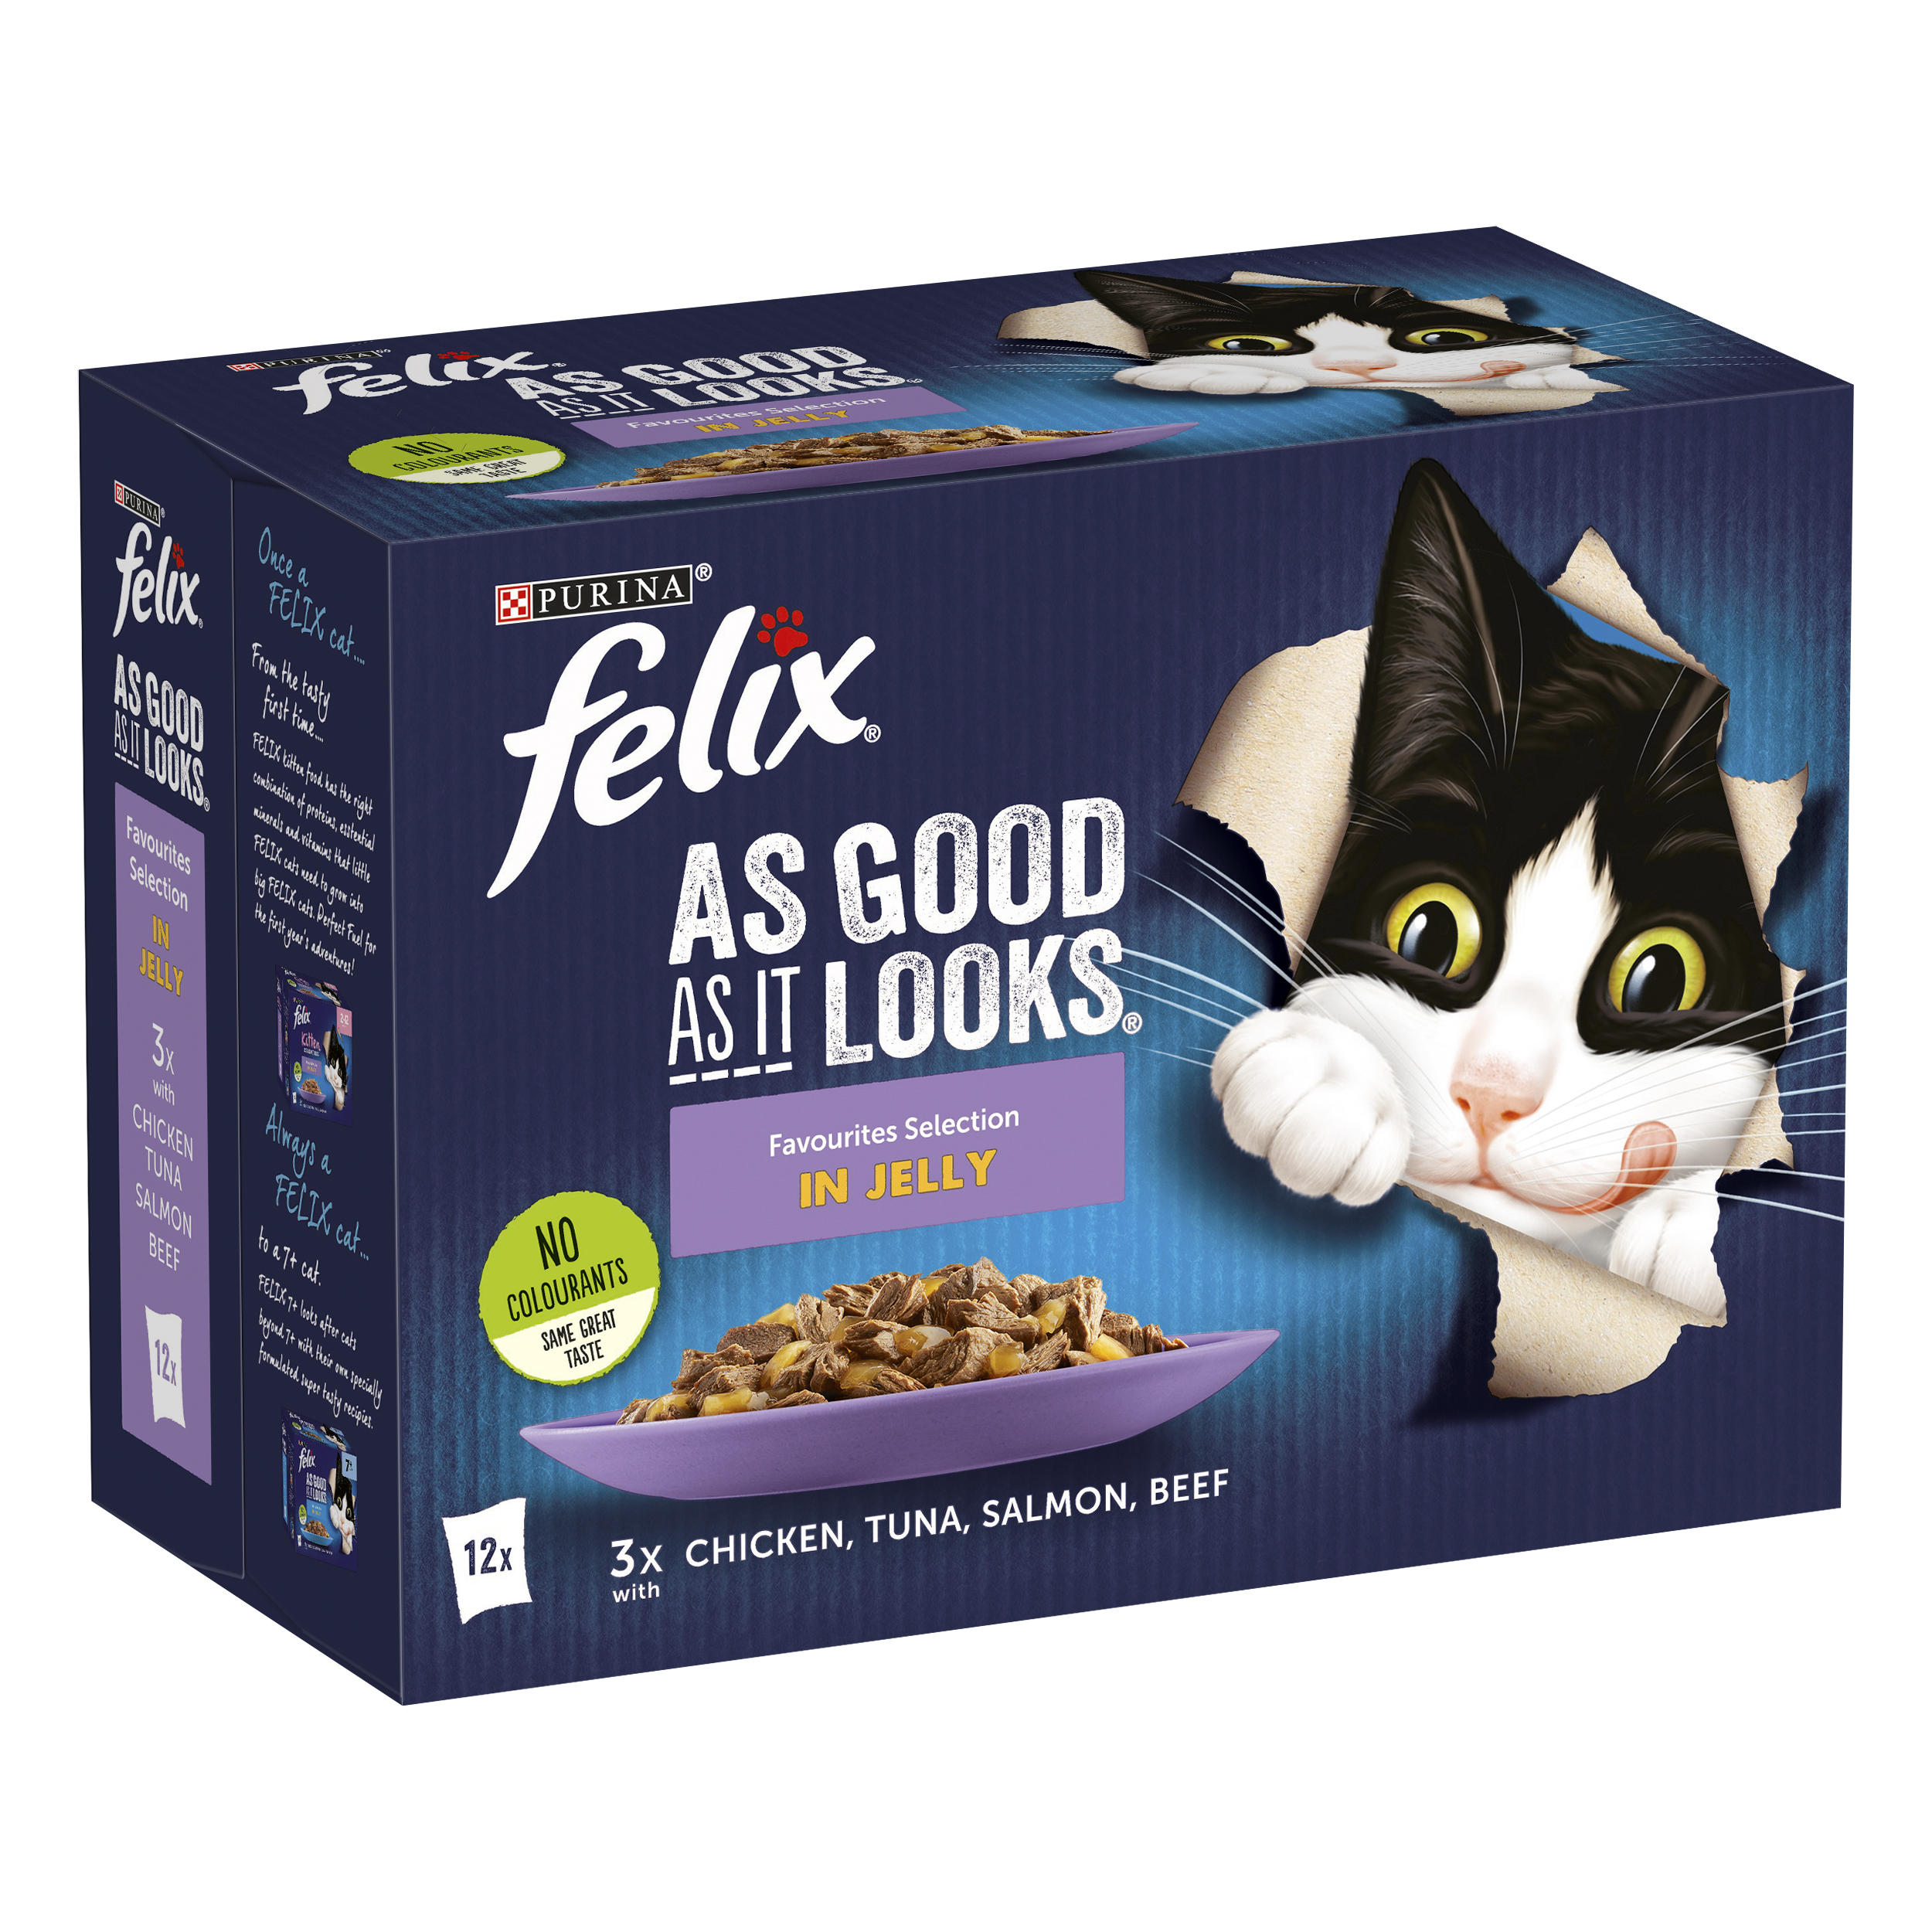 Purina Felix® As Good As It Looks Multipack Favourites Selection in Jelly 100g, Pack of 12